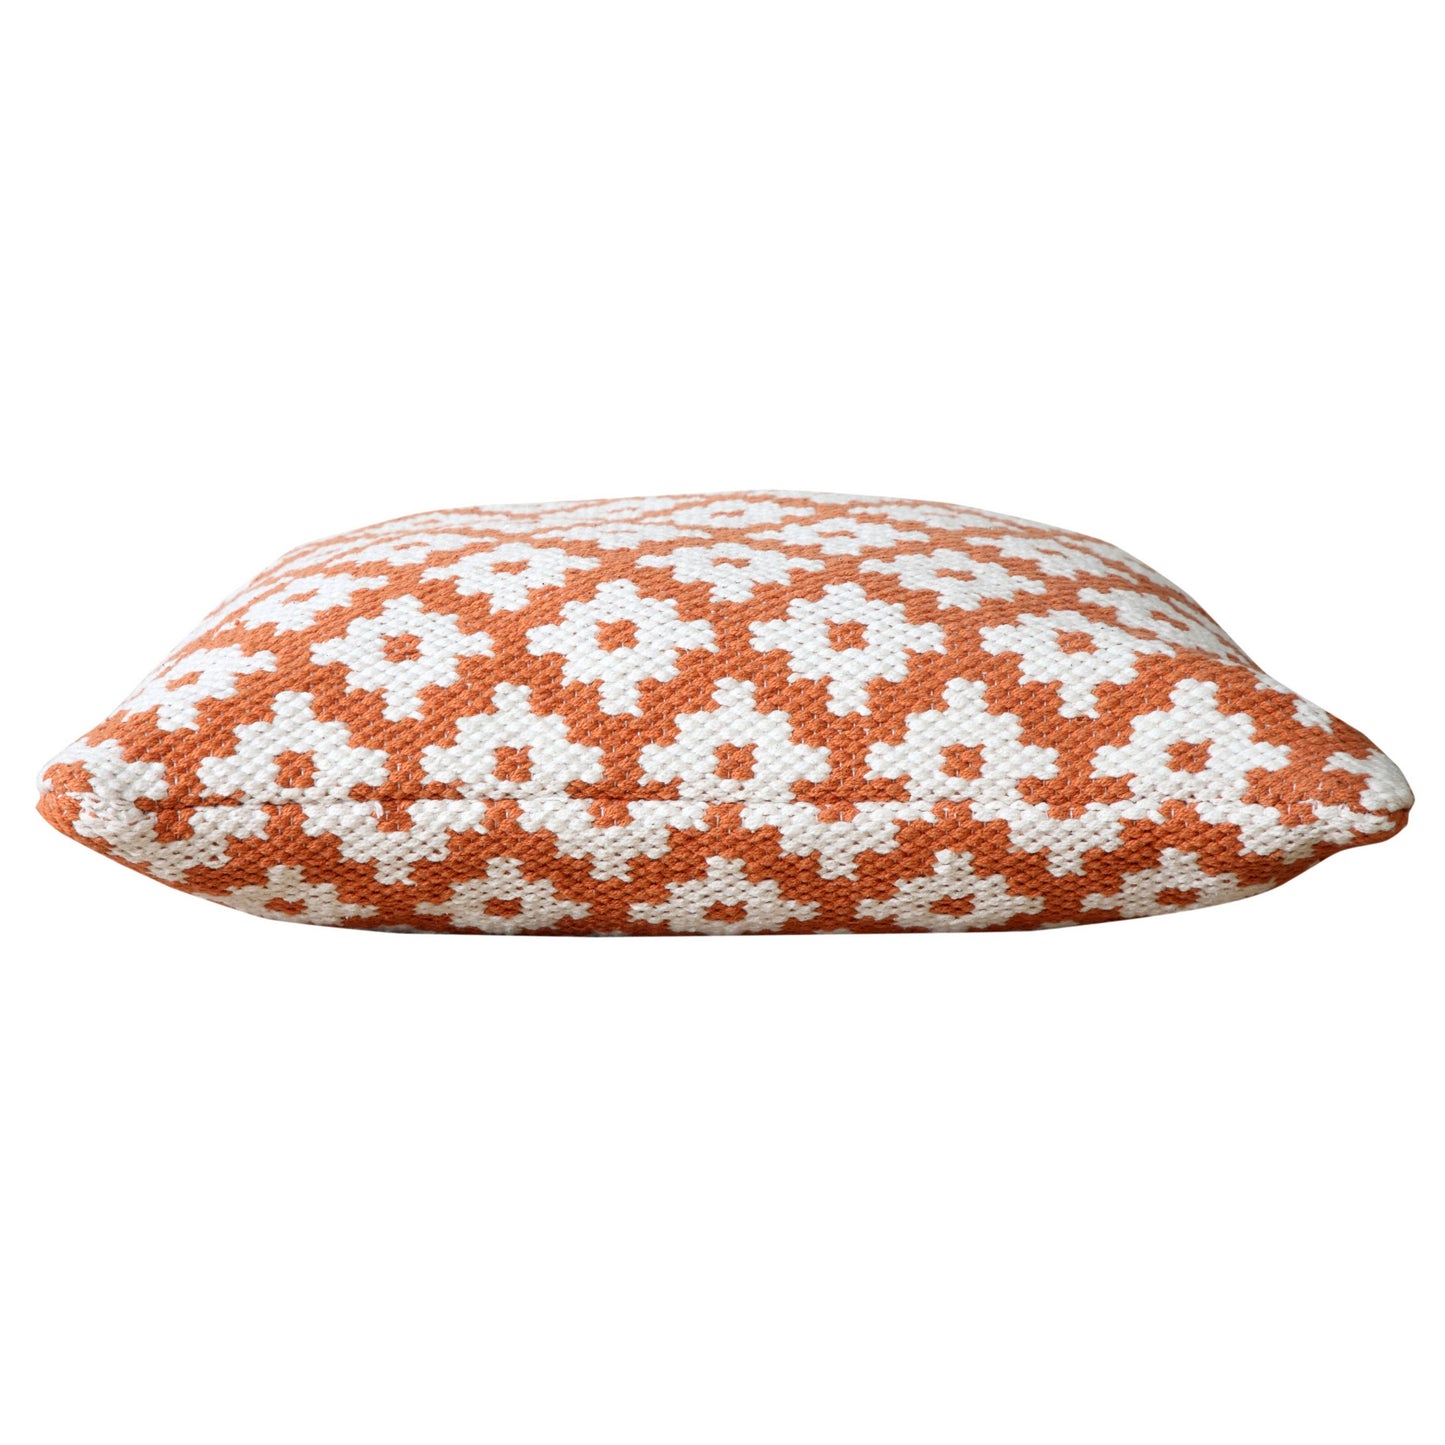 The throw pillow on its side to show its thickness